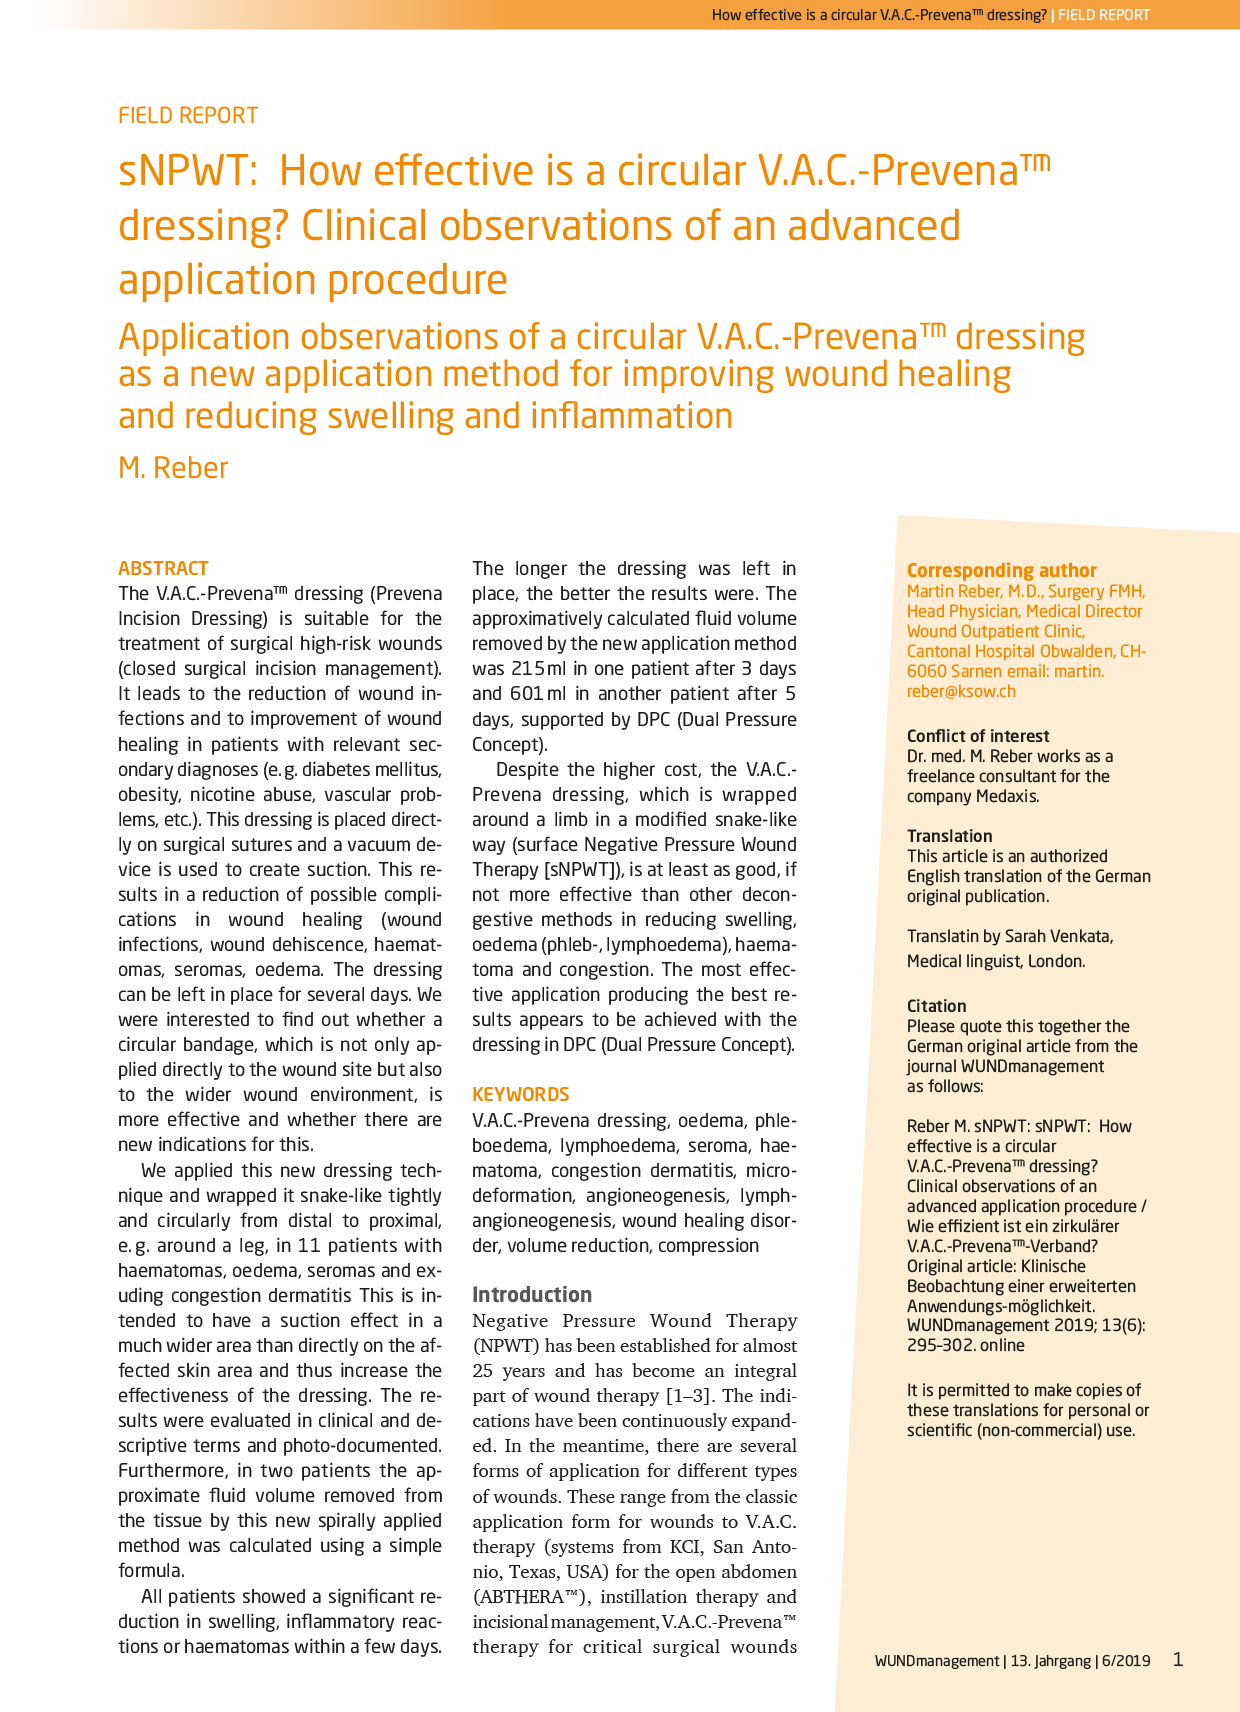 Open Access about V.A.C-Prevena dressing